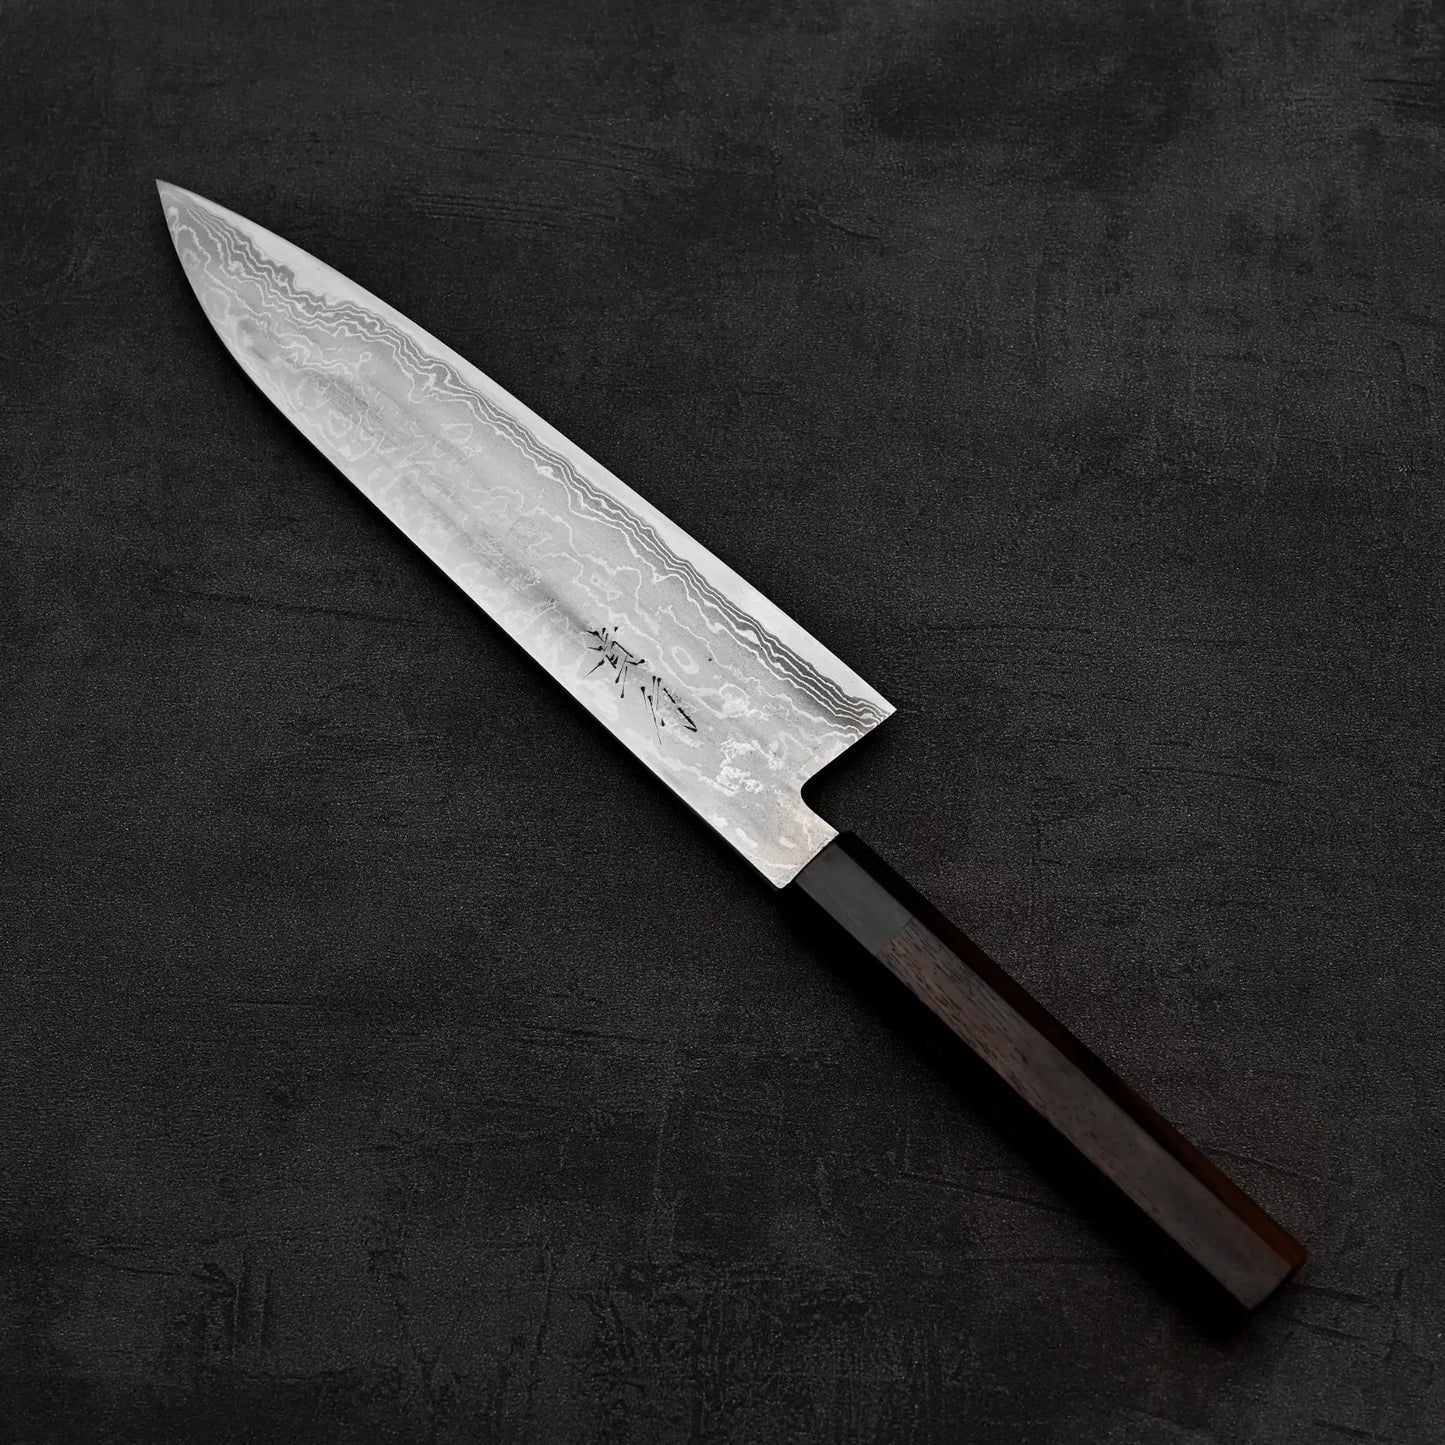 Top down view of Takayuki Iwai aogami#2 damascus 240mm gyuto knife where pointed tip is facing towards the upper left